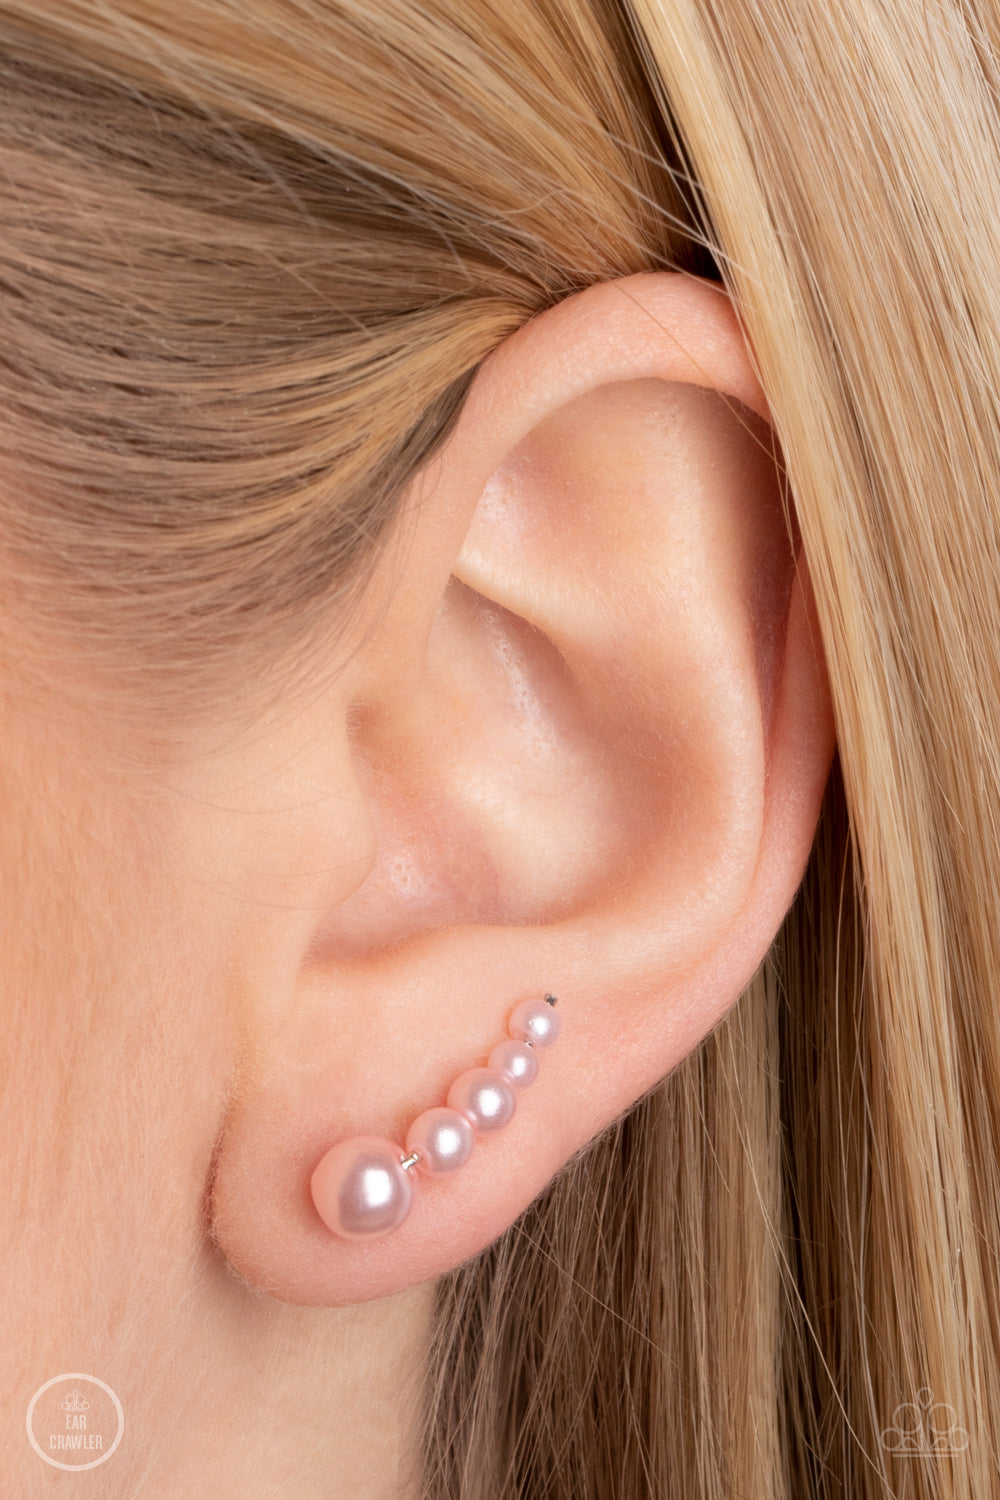 Paparazzi Accessories - Dropping into Divine #E86 Peg - Pink Earrings Crawlers